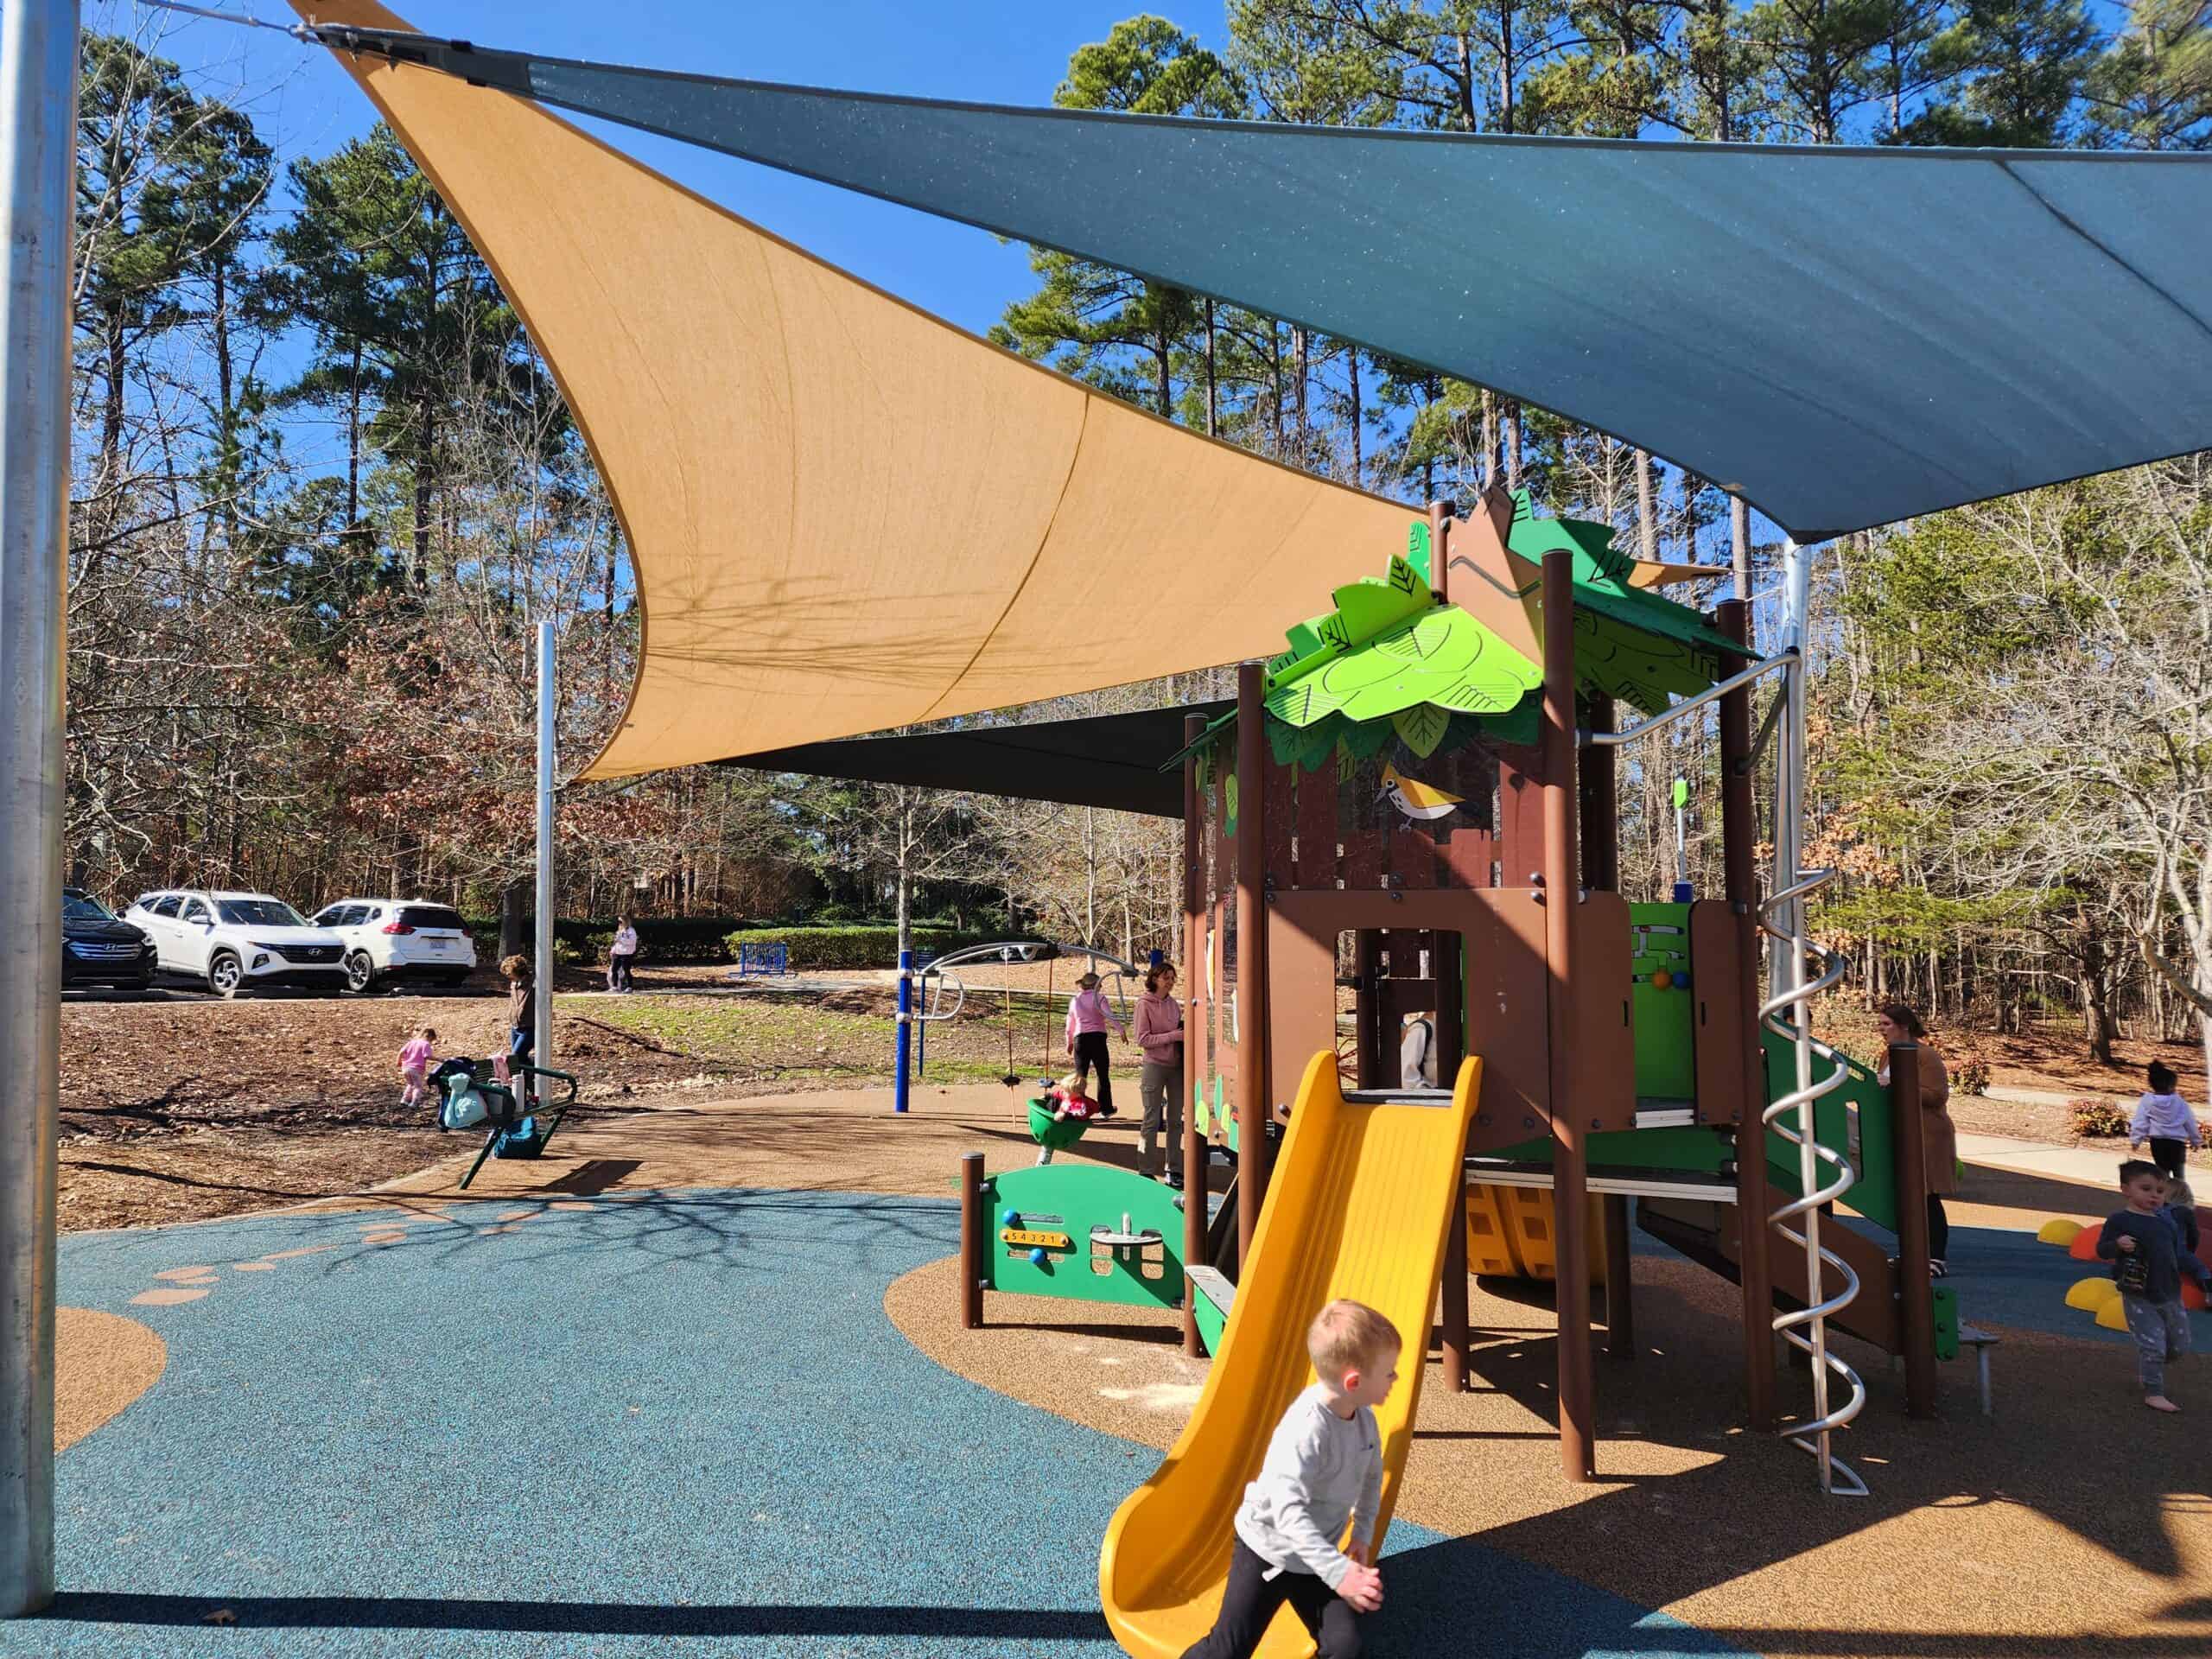 several kids enjoy a sunny day at one of Raleigh's best playgrounds for toddlers, featuring colorful play structures under protective shade sails, with ample space for play and parental supervision.